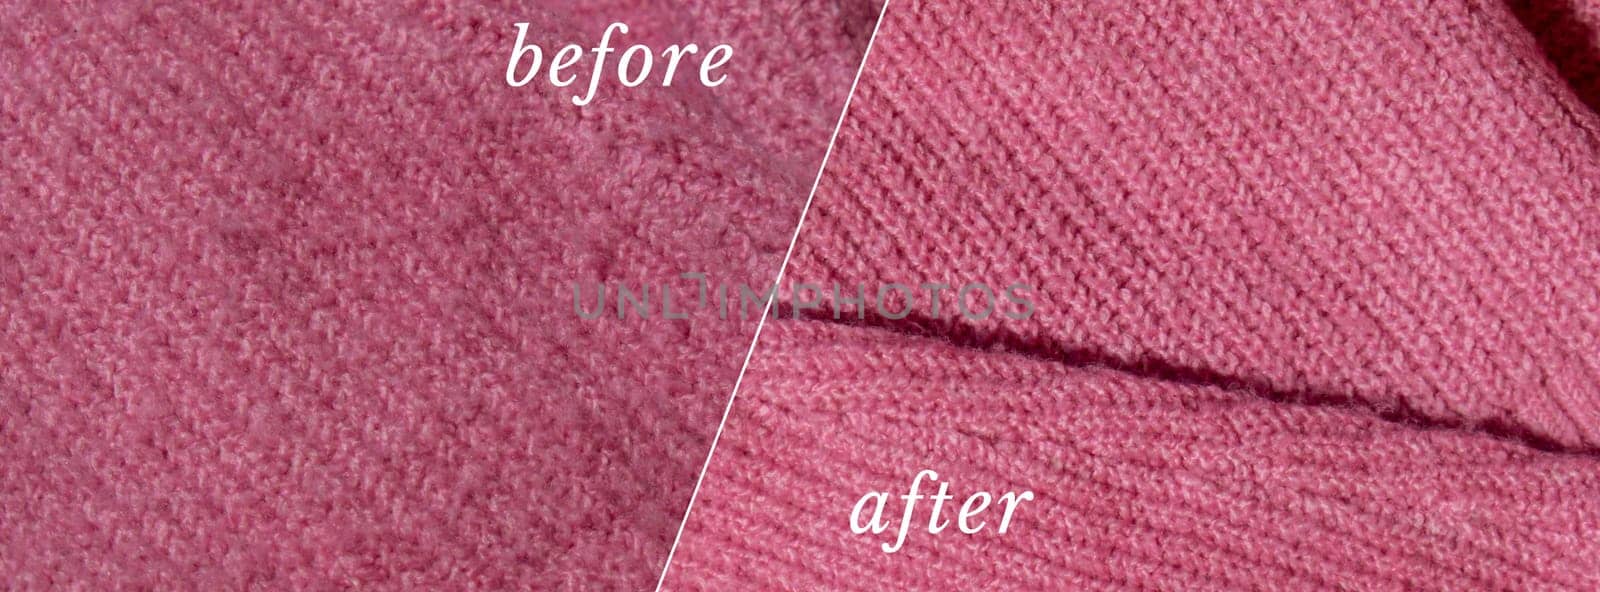 BEFORE AFTER effect of Anti-pilling razor. Banner Device for shaving pellets clothes. Anti-Plush fabric Shaver. Electric portable sweater pill defuzzer Lint remover from acrylic or wool sweater. Sustainability lifestyle fashion, reducing clothing waste by anna_stasiia